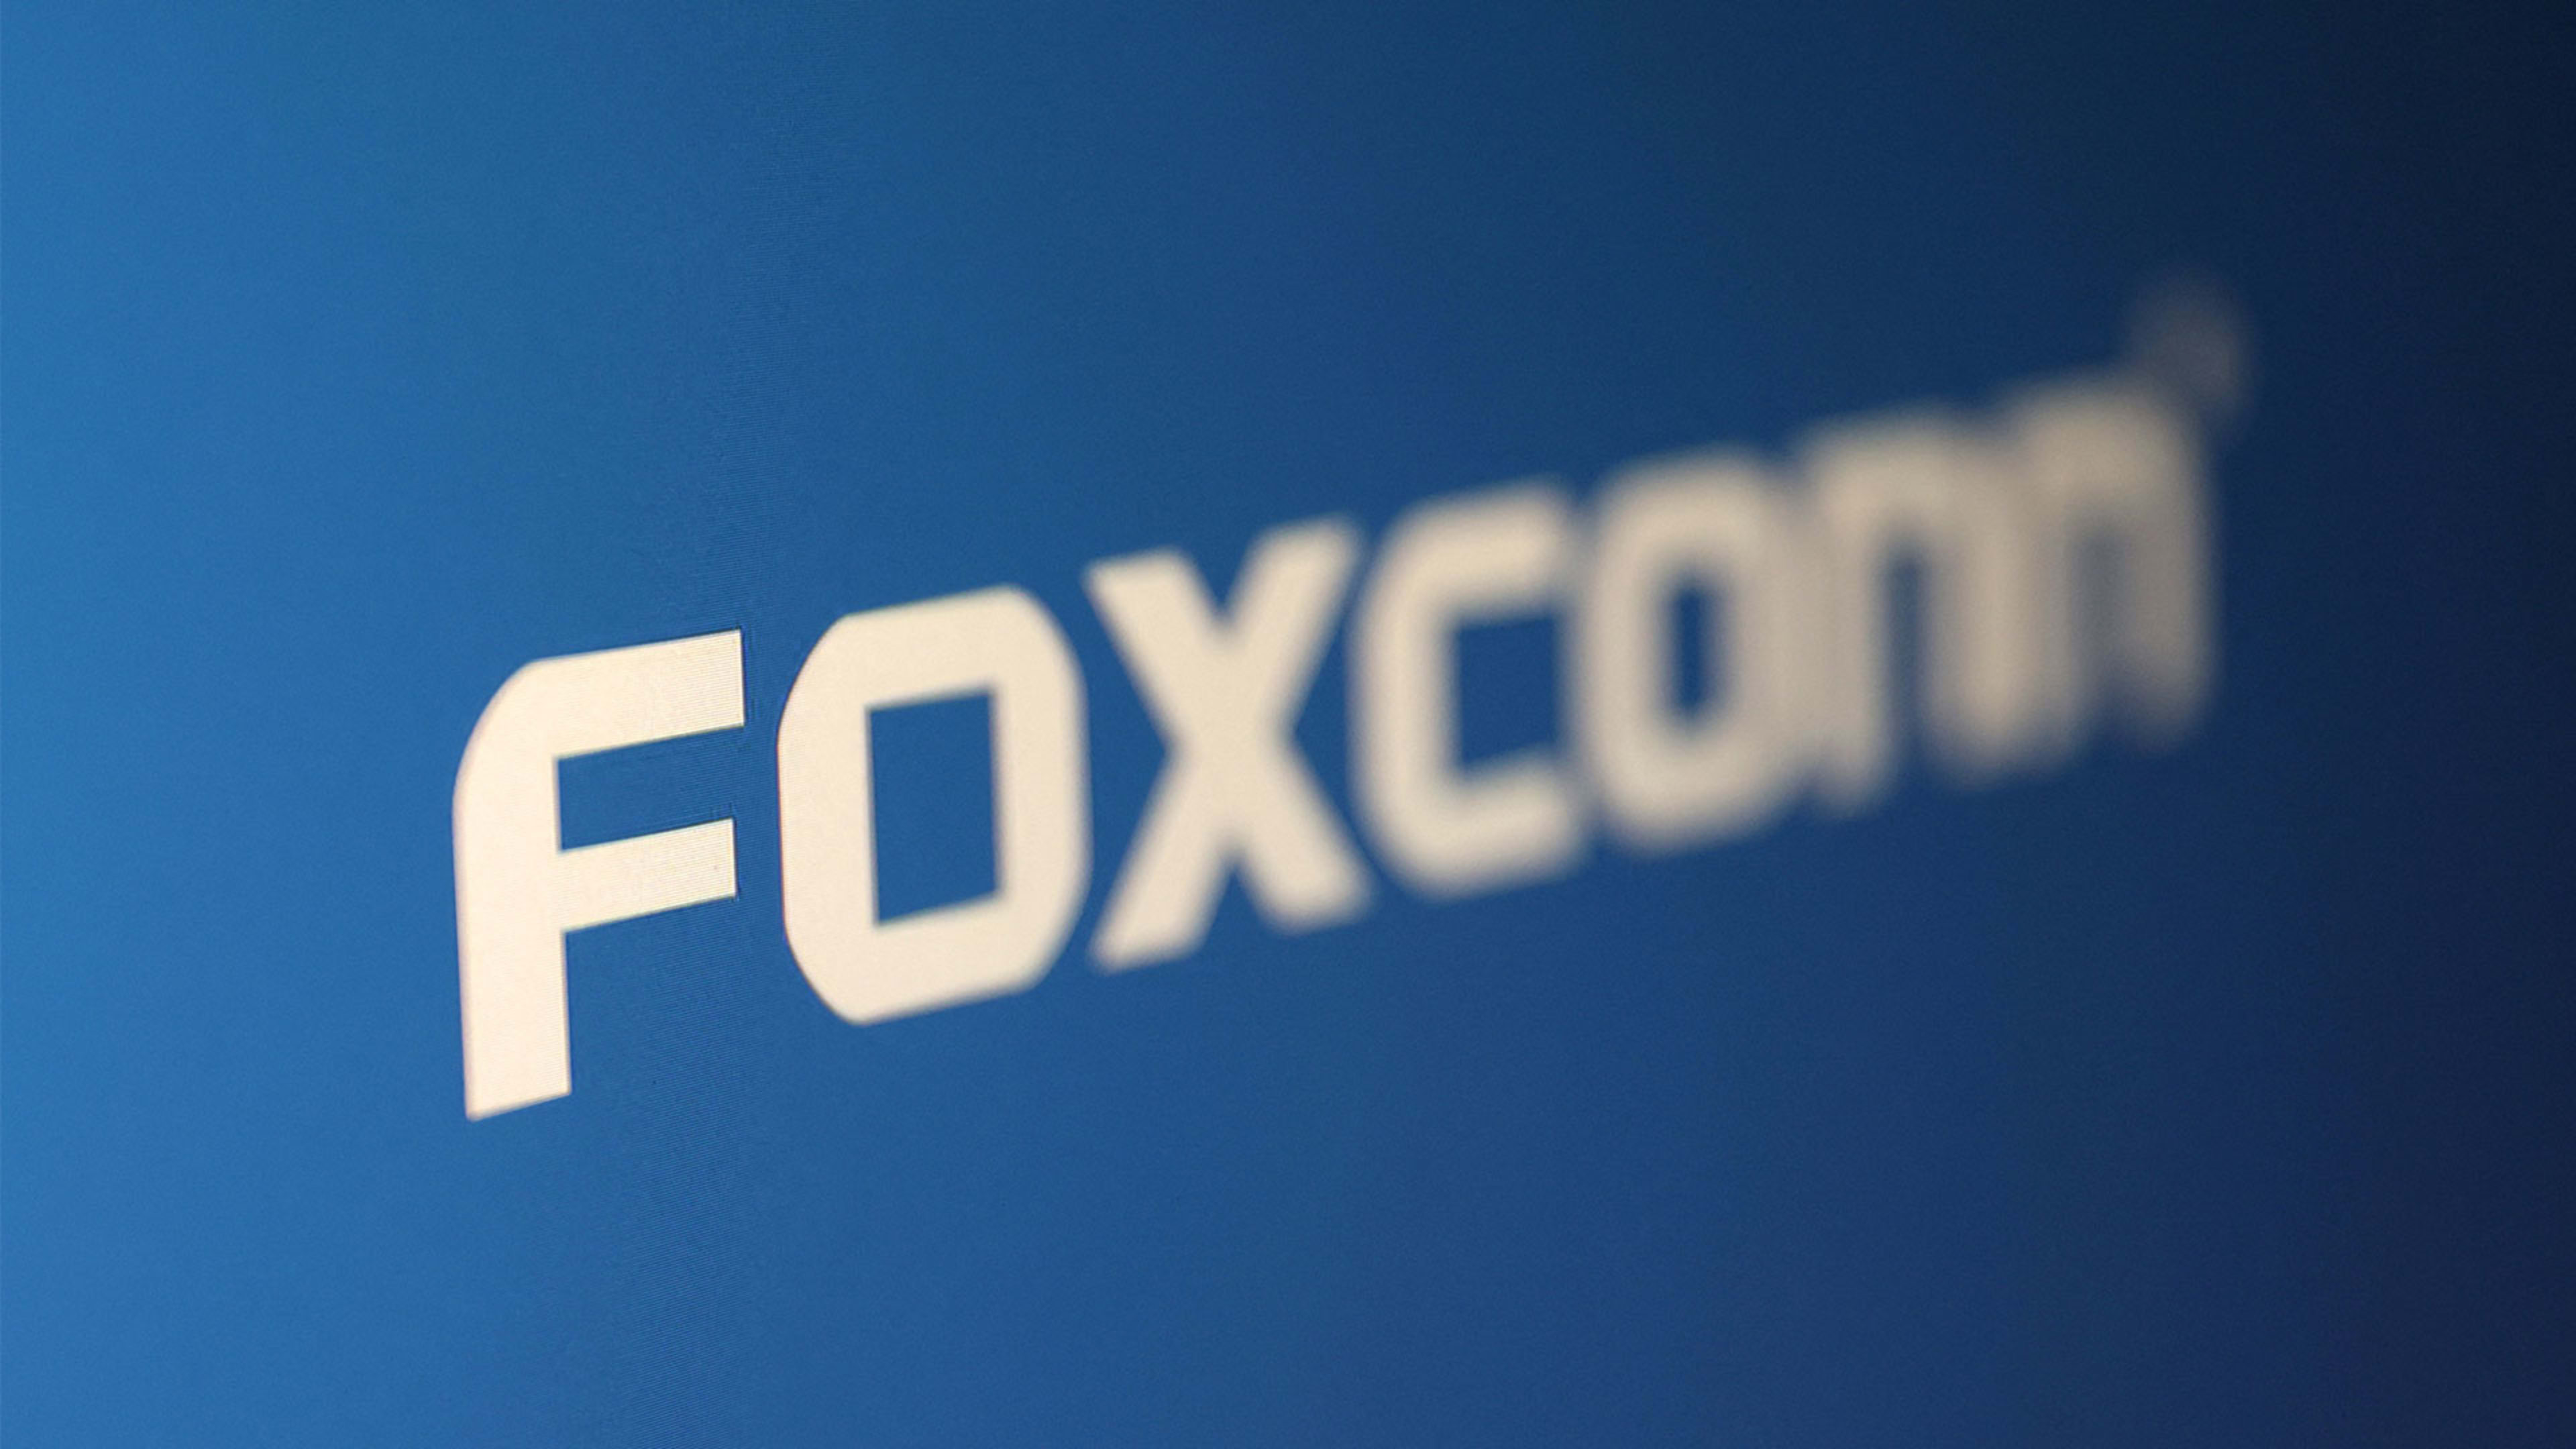 Taiwan’s Foxconn upends ‘one-man rule’ with rotating CEO role